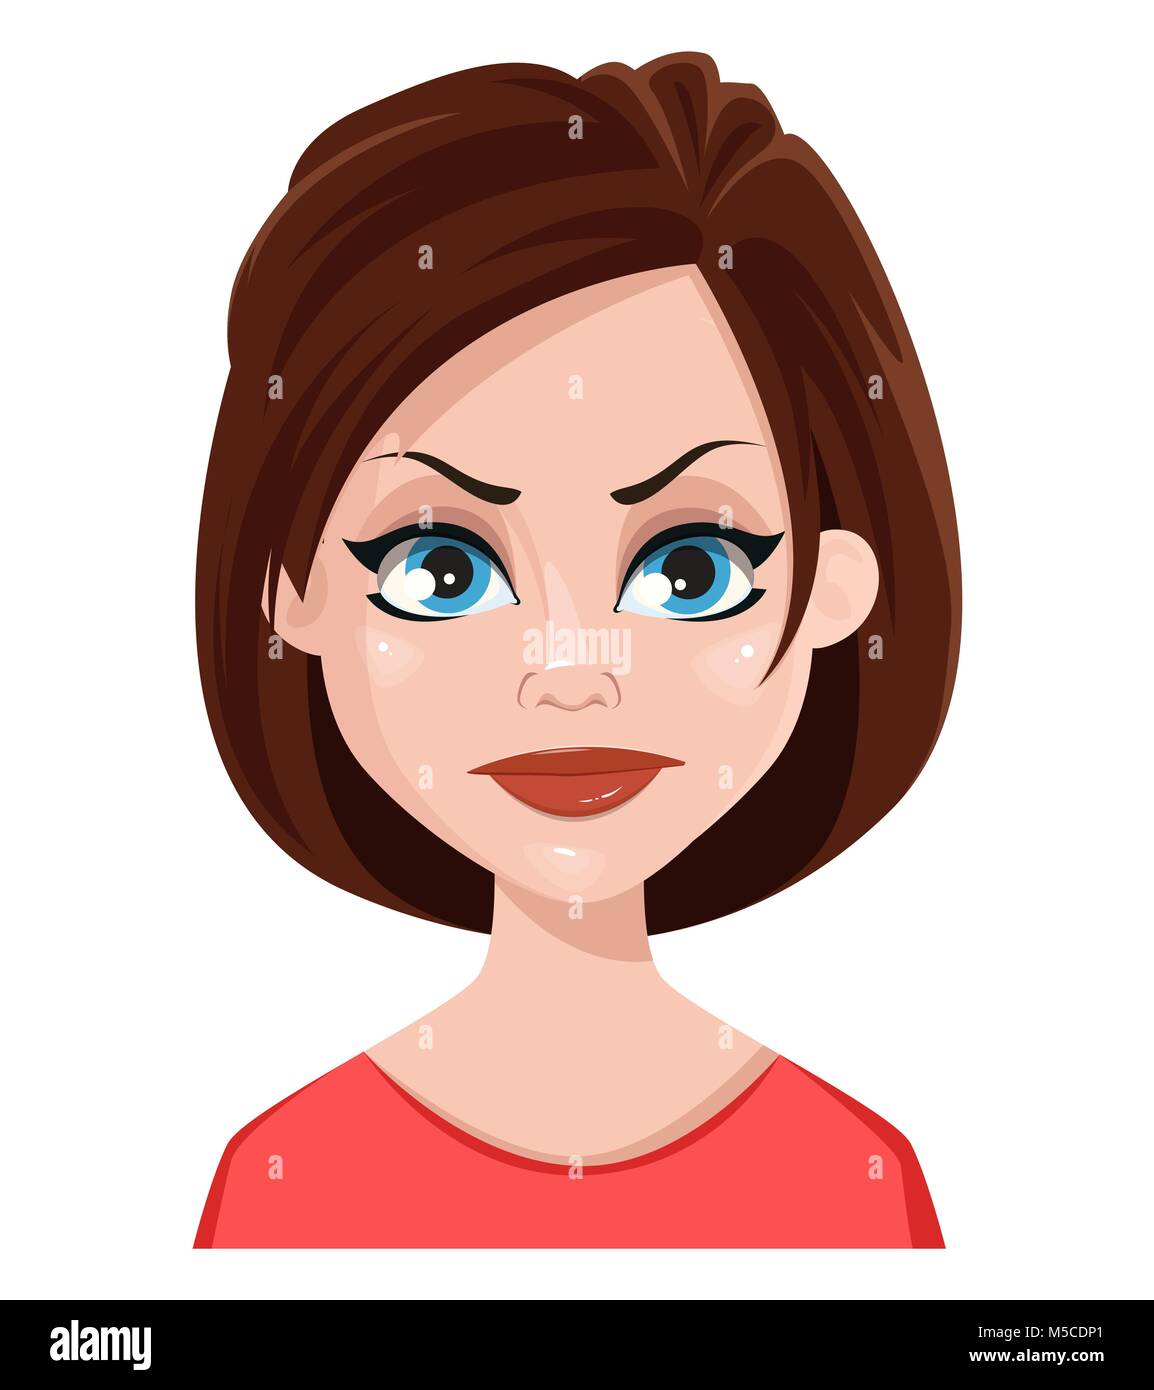 Face expression of a woman - dissatisfied, angry. Female emotions. Pretty cartoon character. Vector illustration isolated on white background. Stock Vector